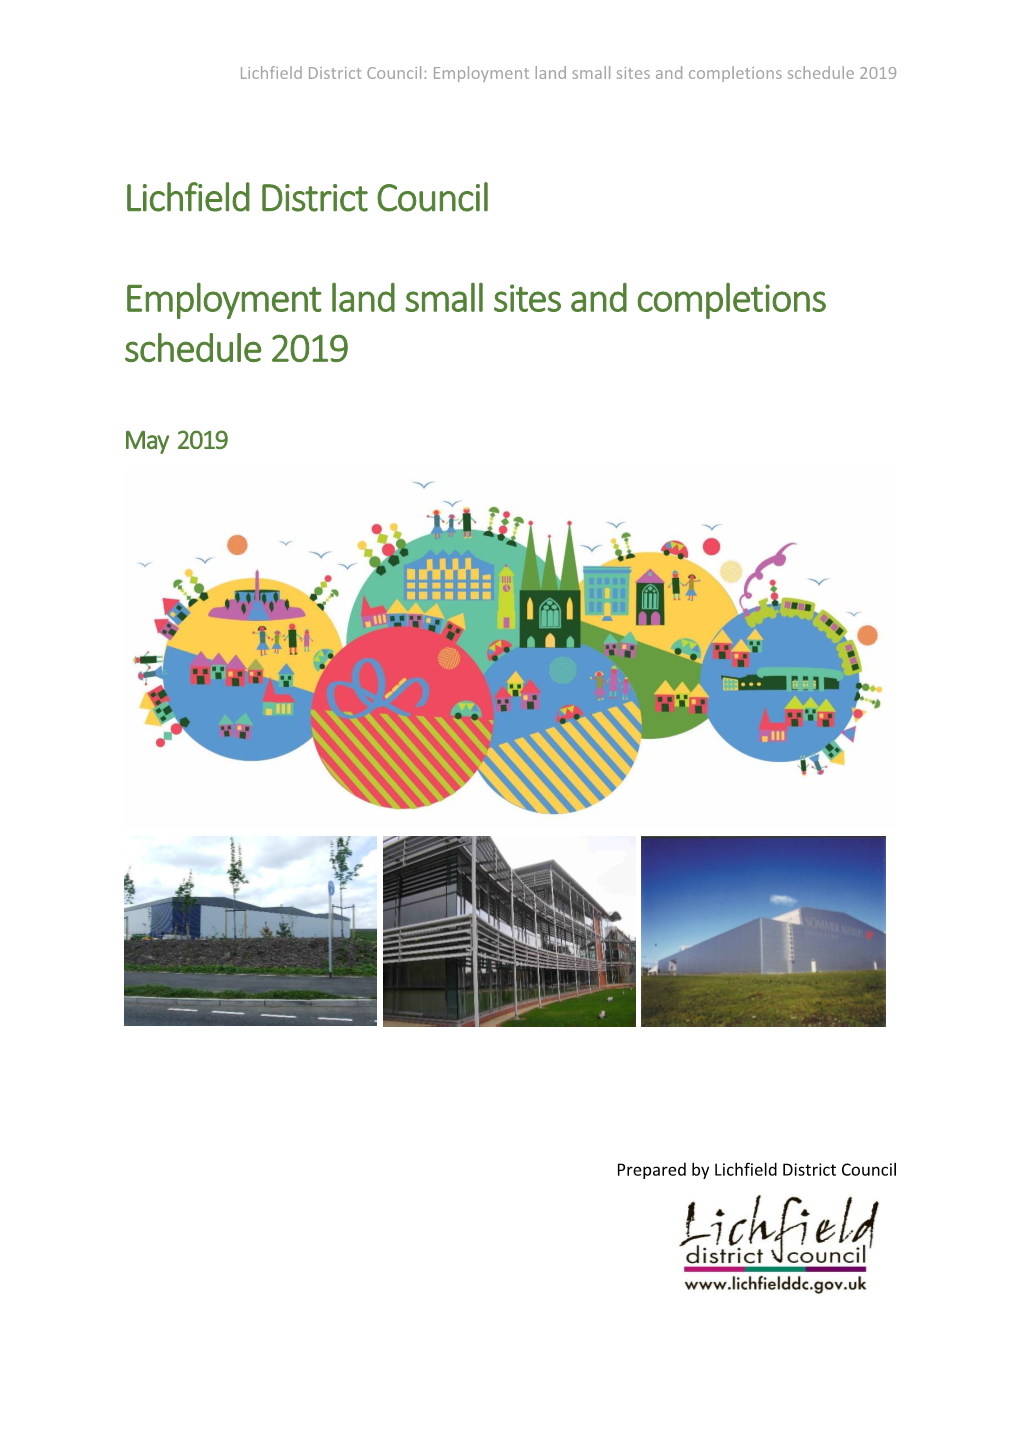 Employment Land Small Sites and Completions Schedule (ELAA 2019)